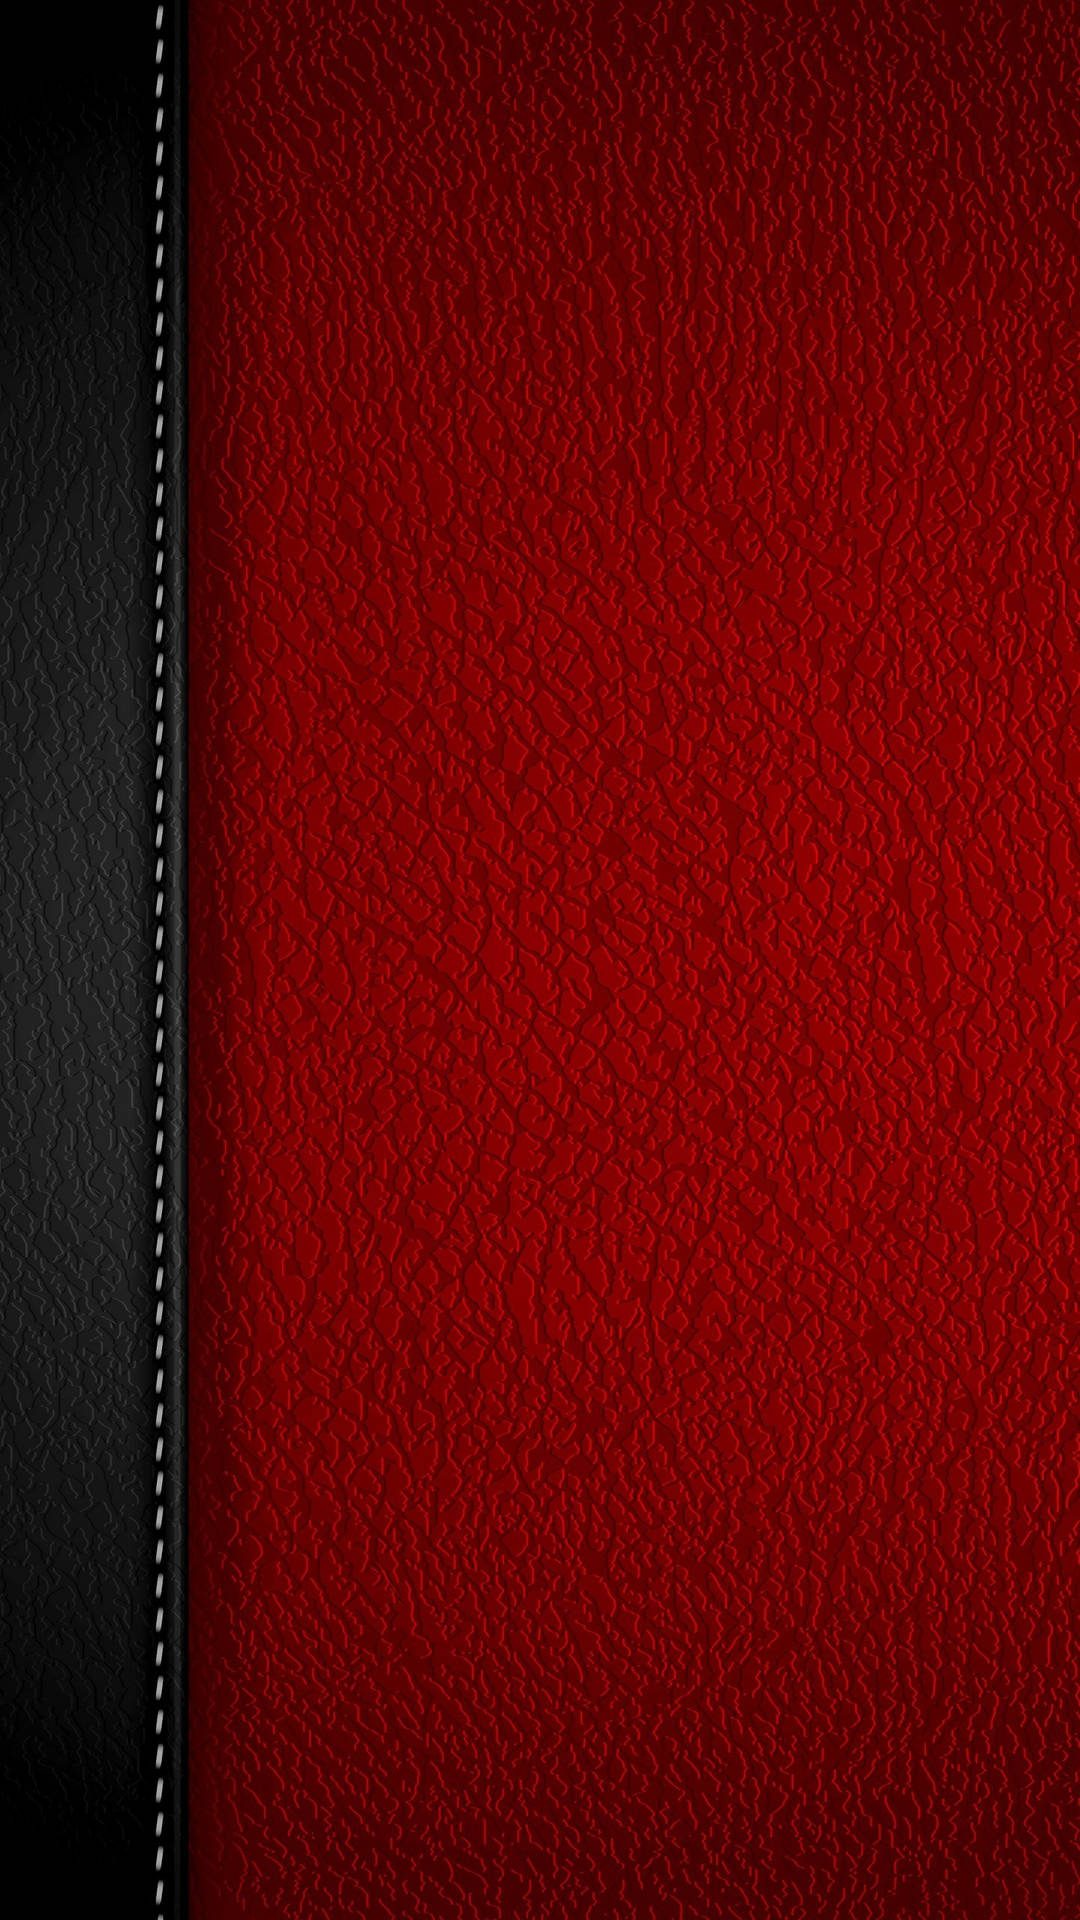 Htc Red Leather Wallpaper